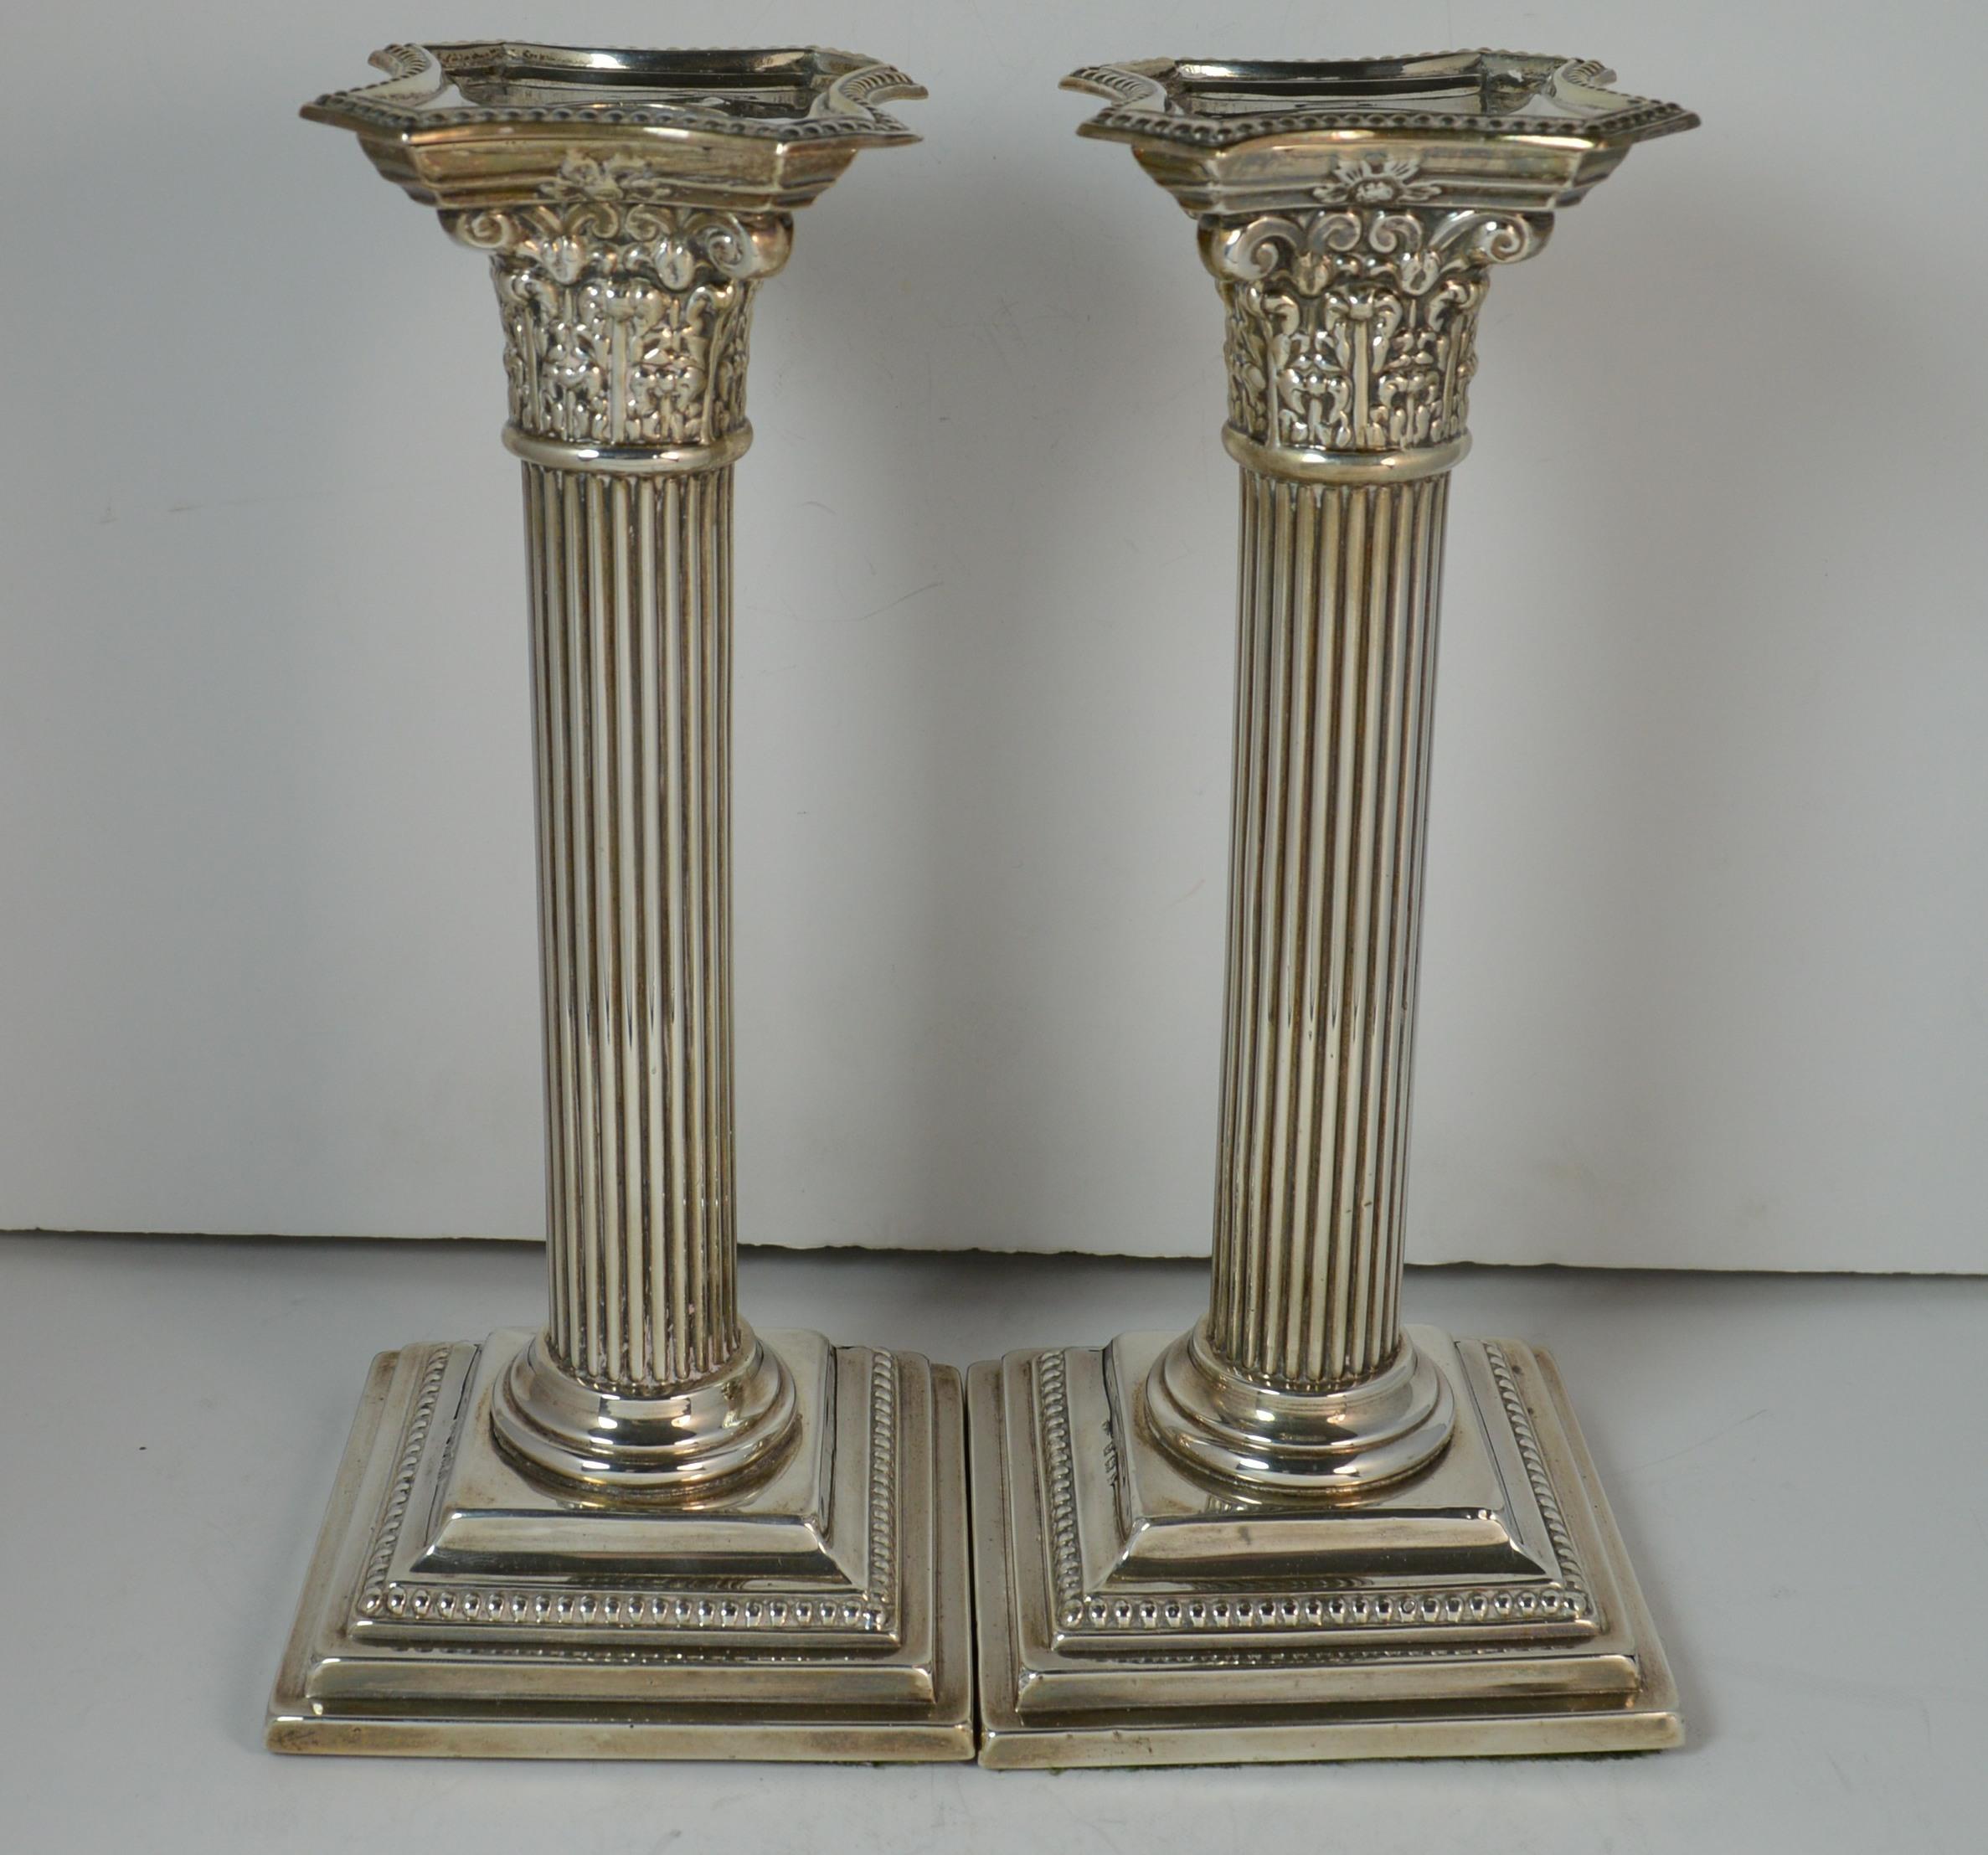 

A pair of English sterling silver candlesticks. Corinthian column design. Attractive design.


Hallmarks ; full set of hallmarks to base

Weight ; N/A, loaded

Size ; 8 inches tall, 9.5cm diameter base

Condition ; Very good. Crisp design. Stand